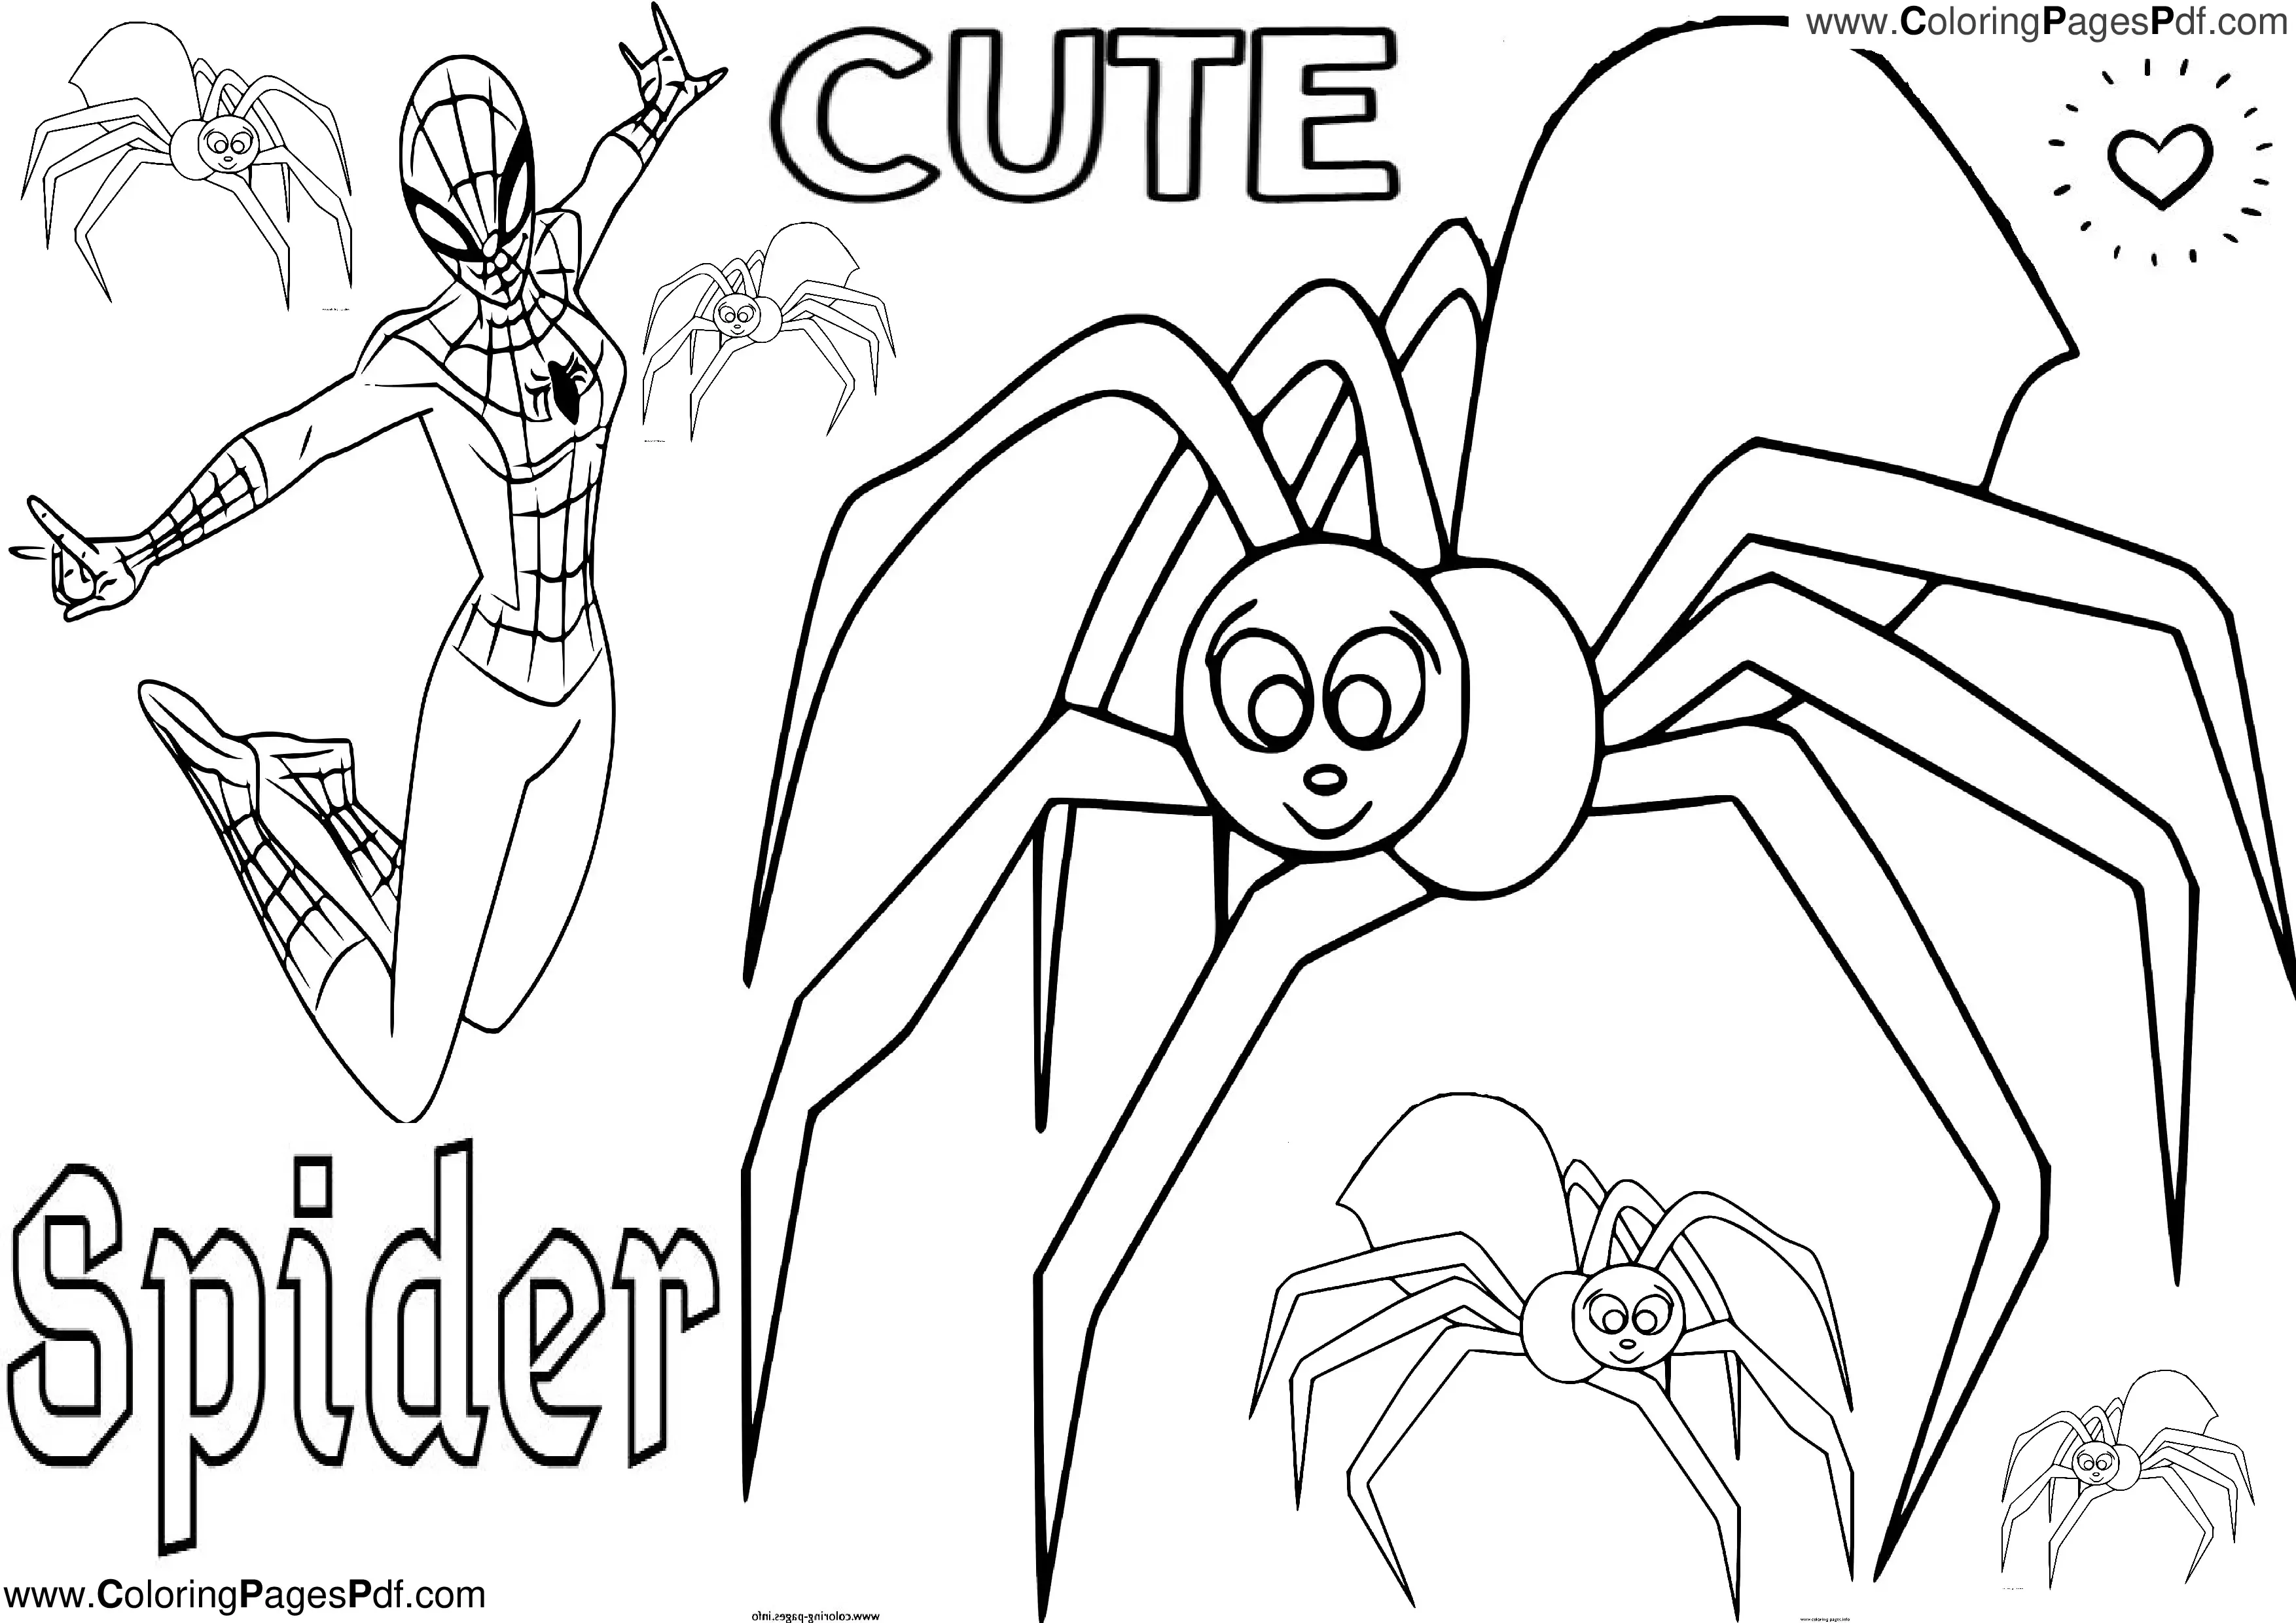 spider printable coloring pages,spider coloring page printable,spider coloring pages to print,coloring sheets,color by number printable,heart coloring page,printable coloring sheets,bluey coloring page